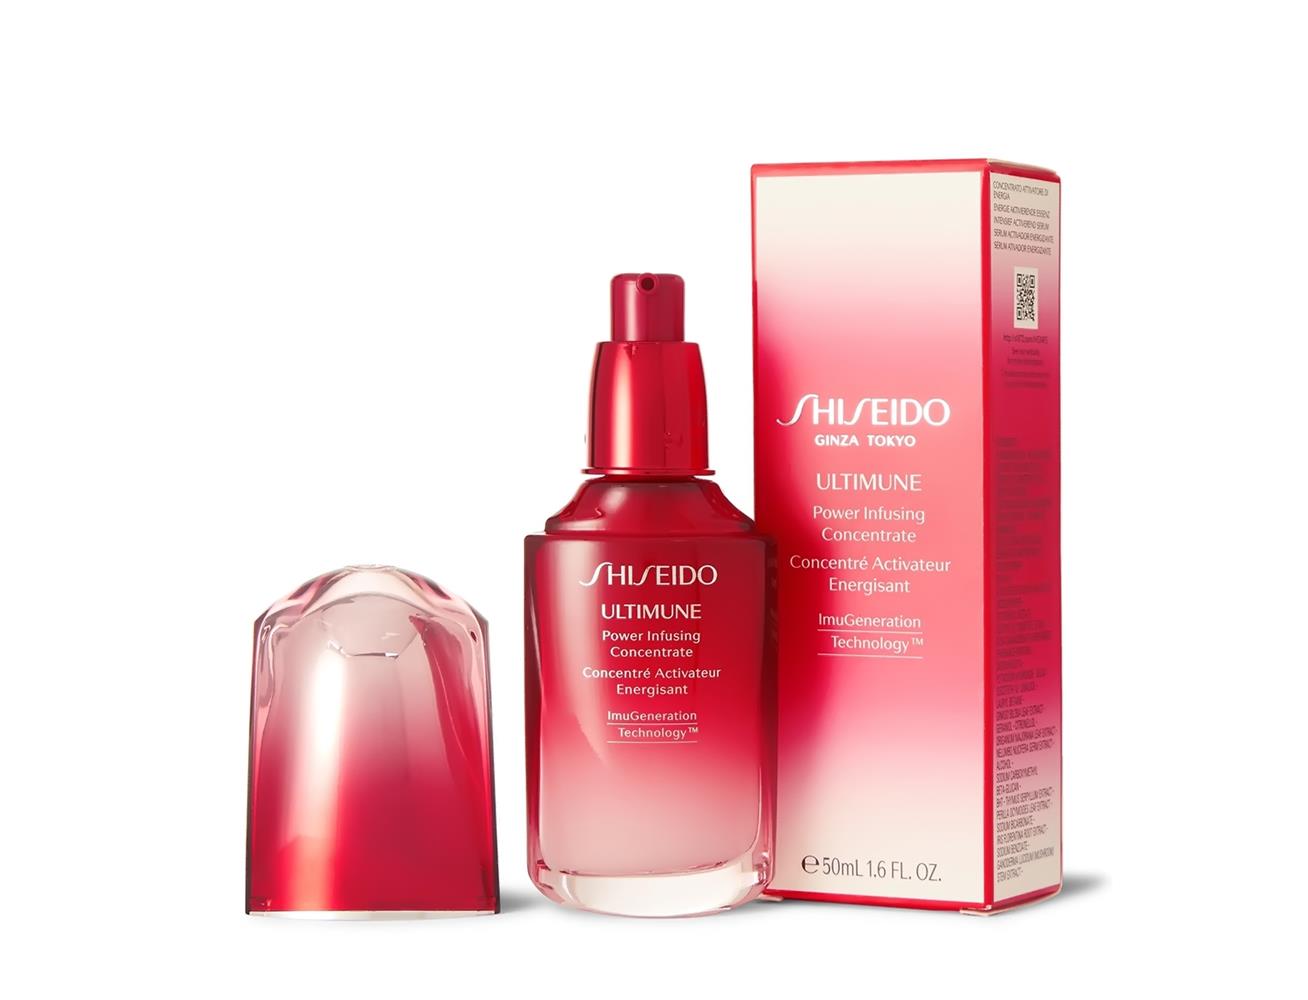 Shiseido ultimune power infusing concentrate. Ultimune концентрат шисейдо Power infusing. Концентрат Shiseido Ultimune Power infusing Concentrate. Сыворотка шисейдо. Шисейдо для волос.